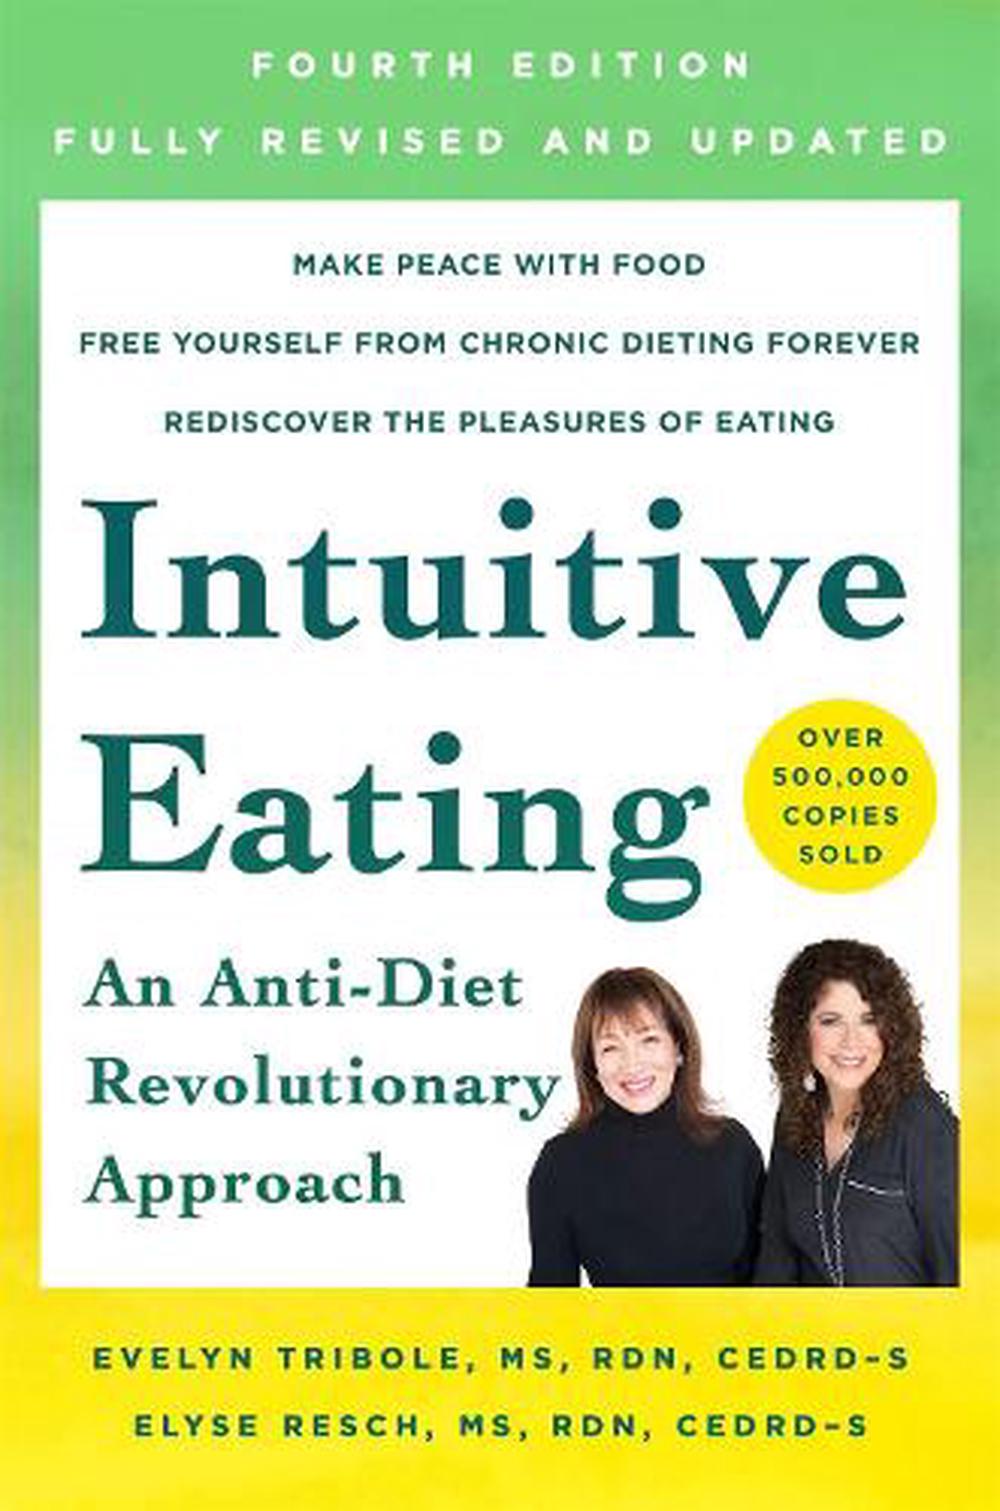 intuitive eating 4th edition a revolutionary anti diet approach